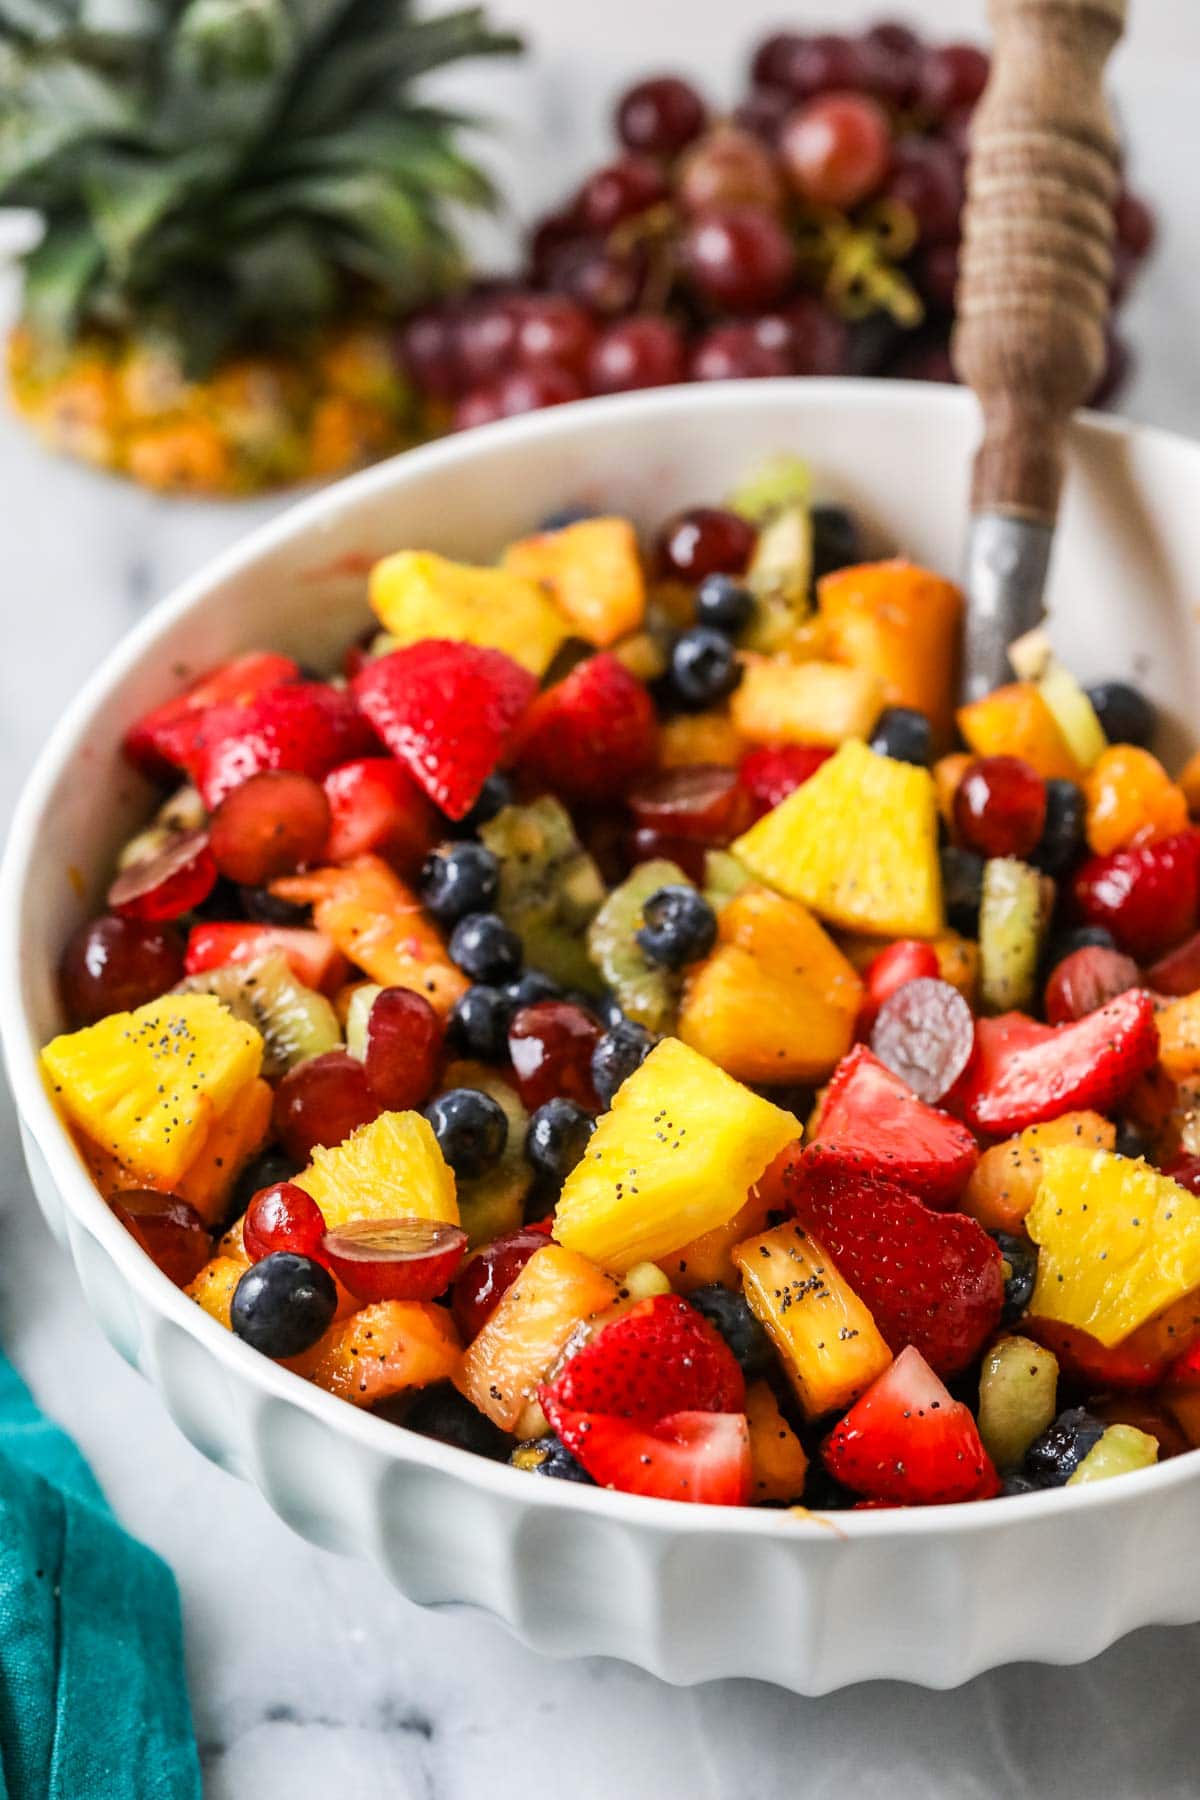 Large white serving bowl of a mixture of chopped berries, pineapple, oranges, and kiwis.